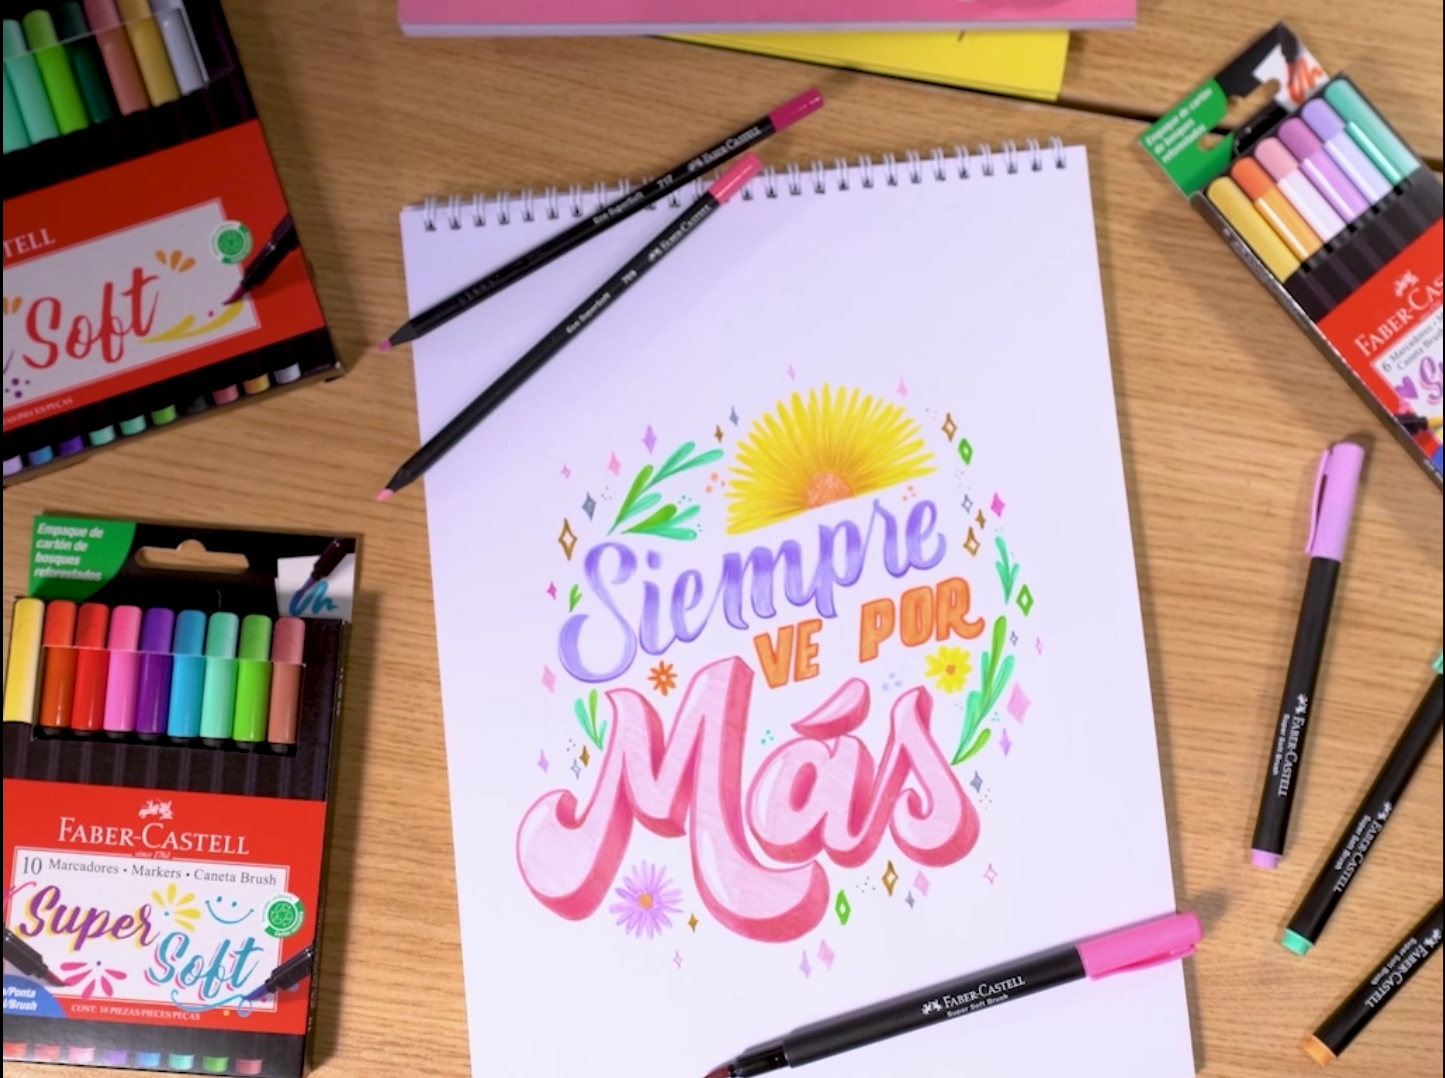 Plumones Faber-Castell SuperSoft x 50 Punta Brocha – Faber Castell Mexico